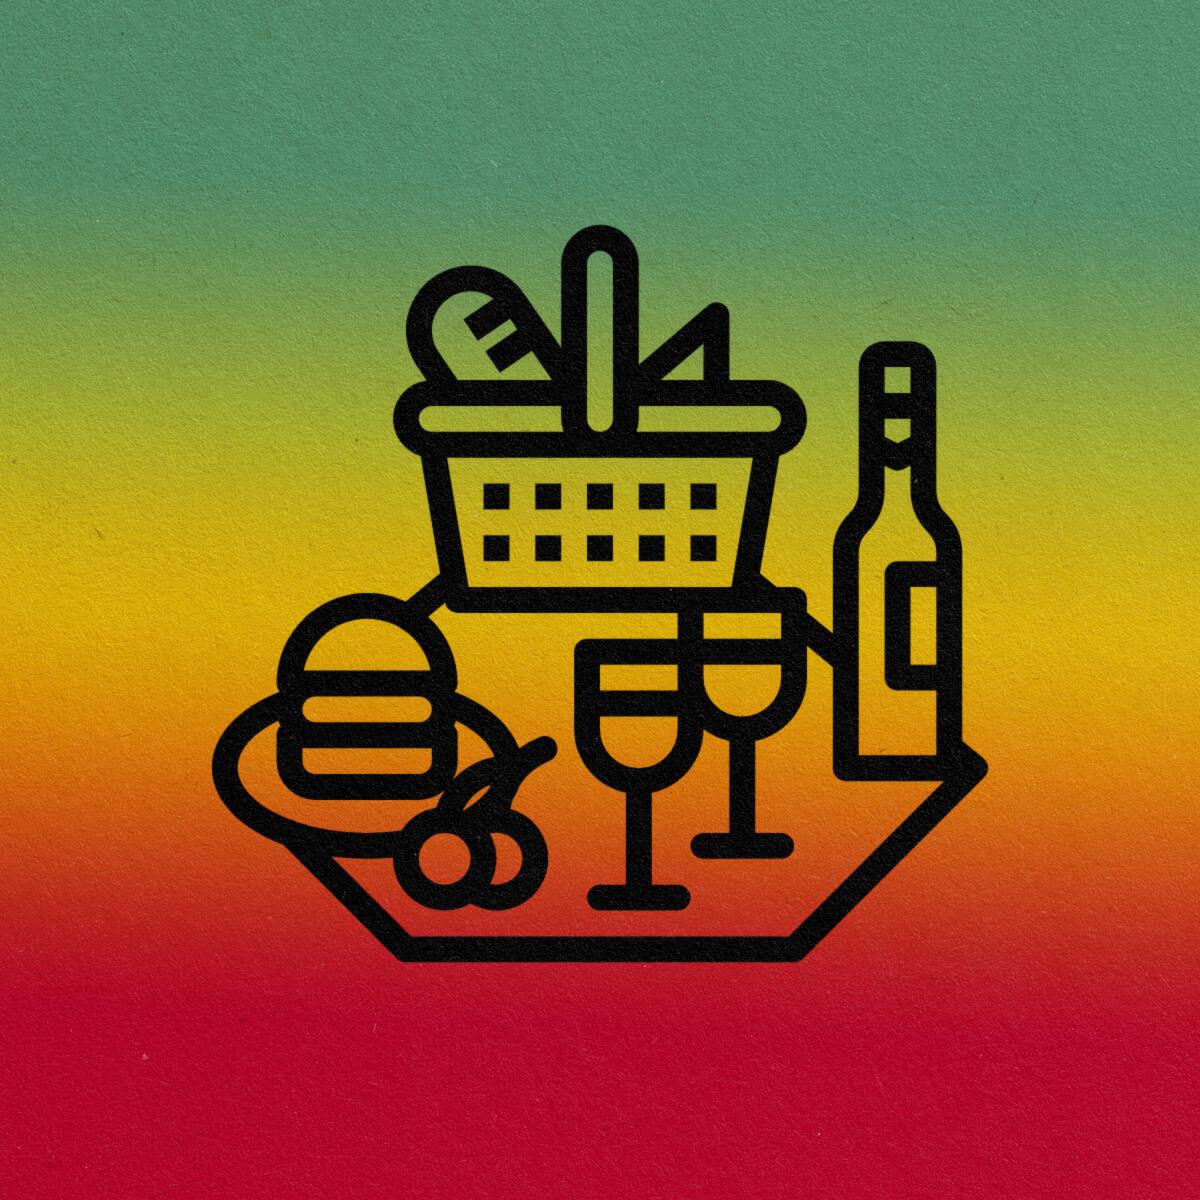 pictogram of a picnic basket, a burger, wine bottles and glasses and a cherry